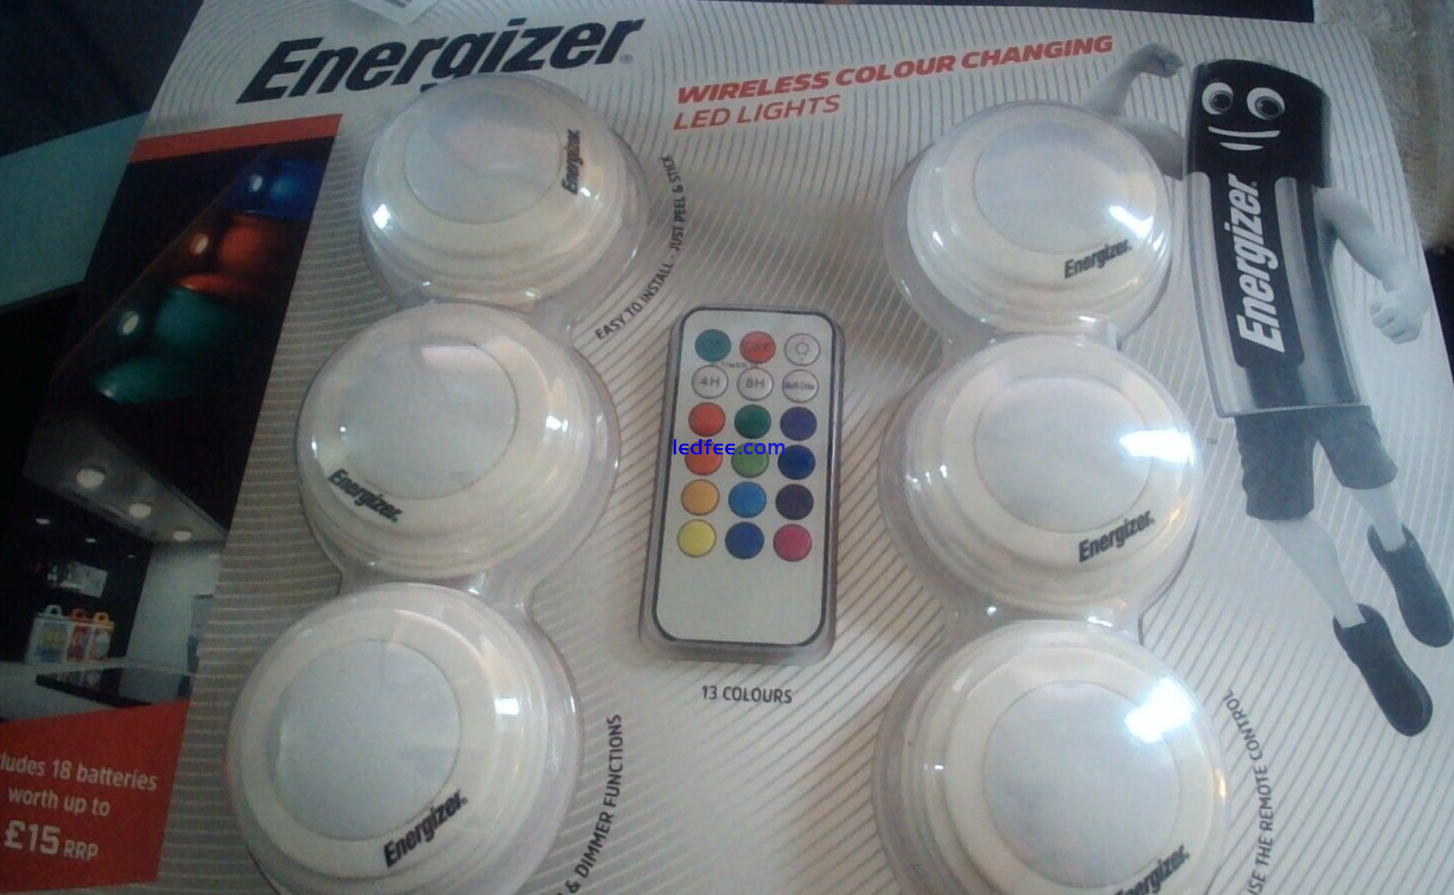 Energizer Wireless Colour Changing LED Lights. 13 colours. 6 lights.18 batteries 0 